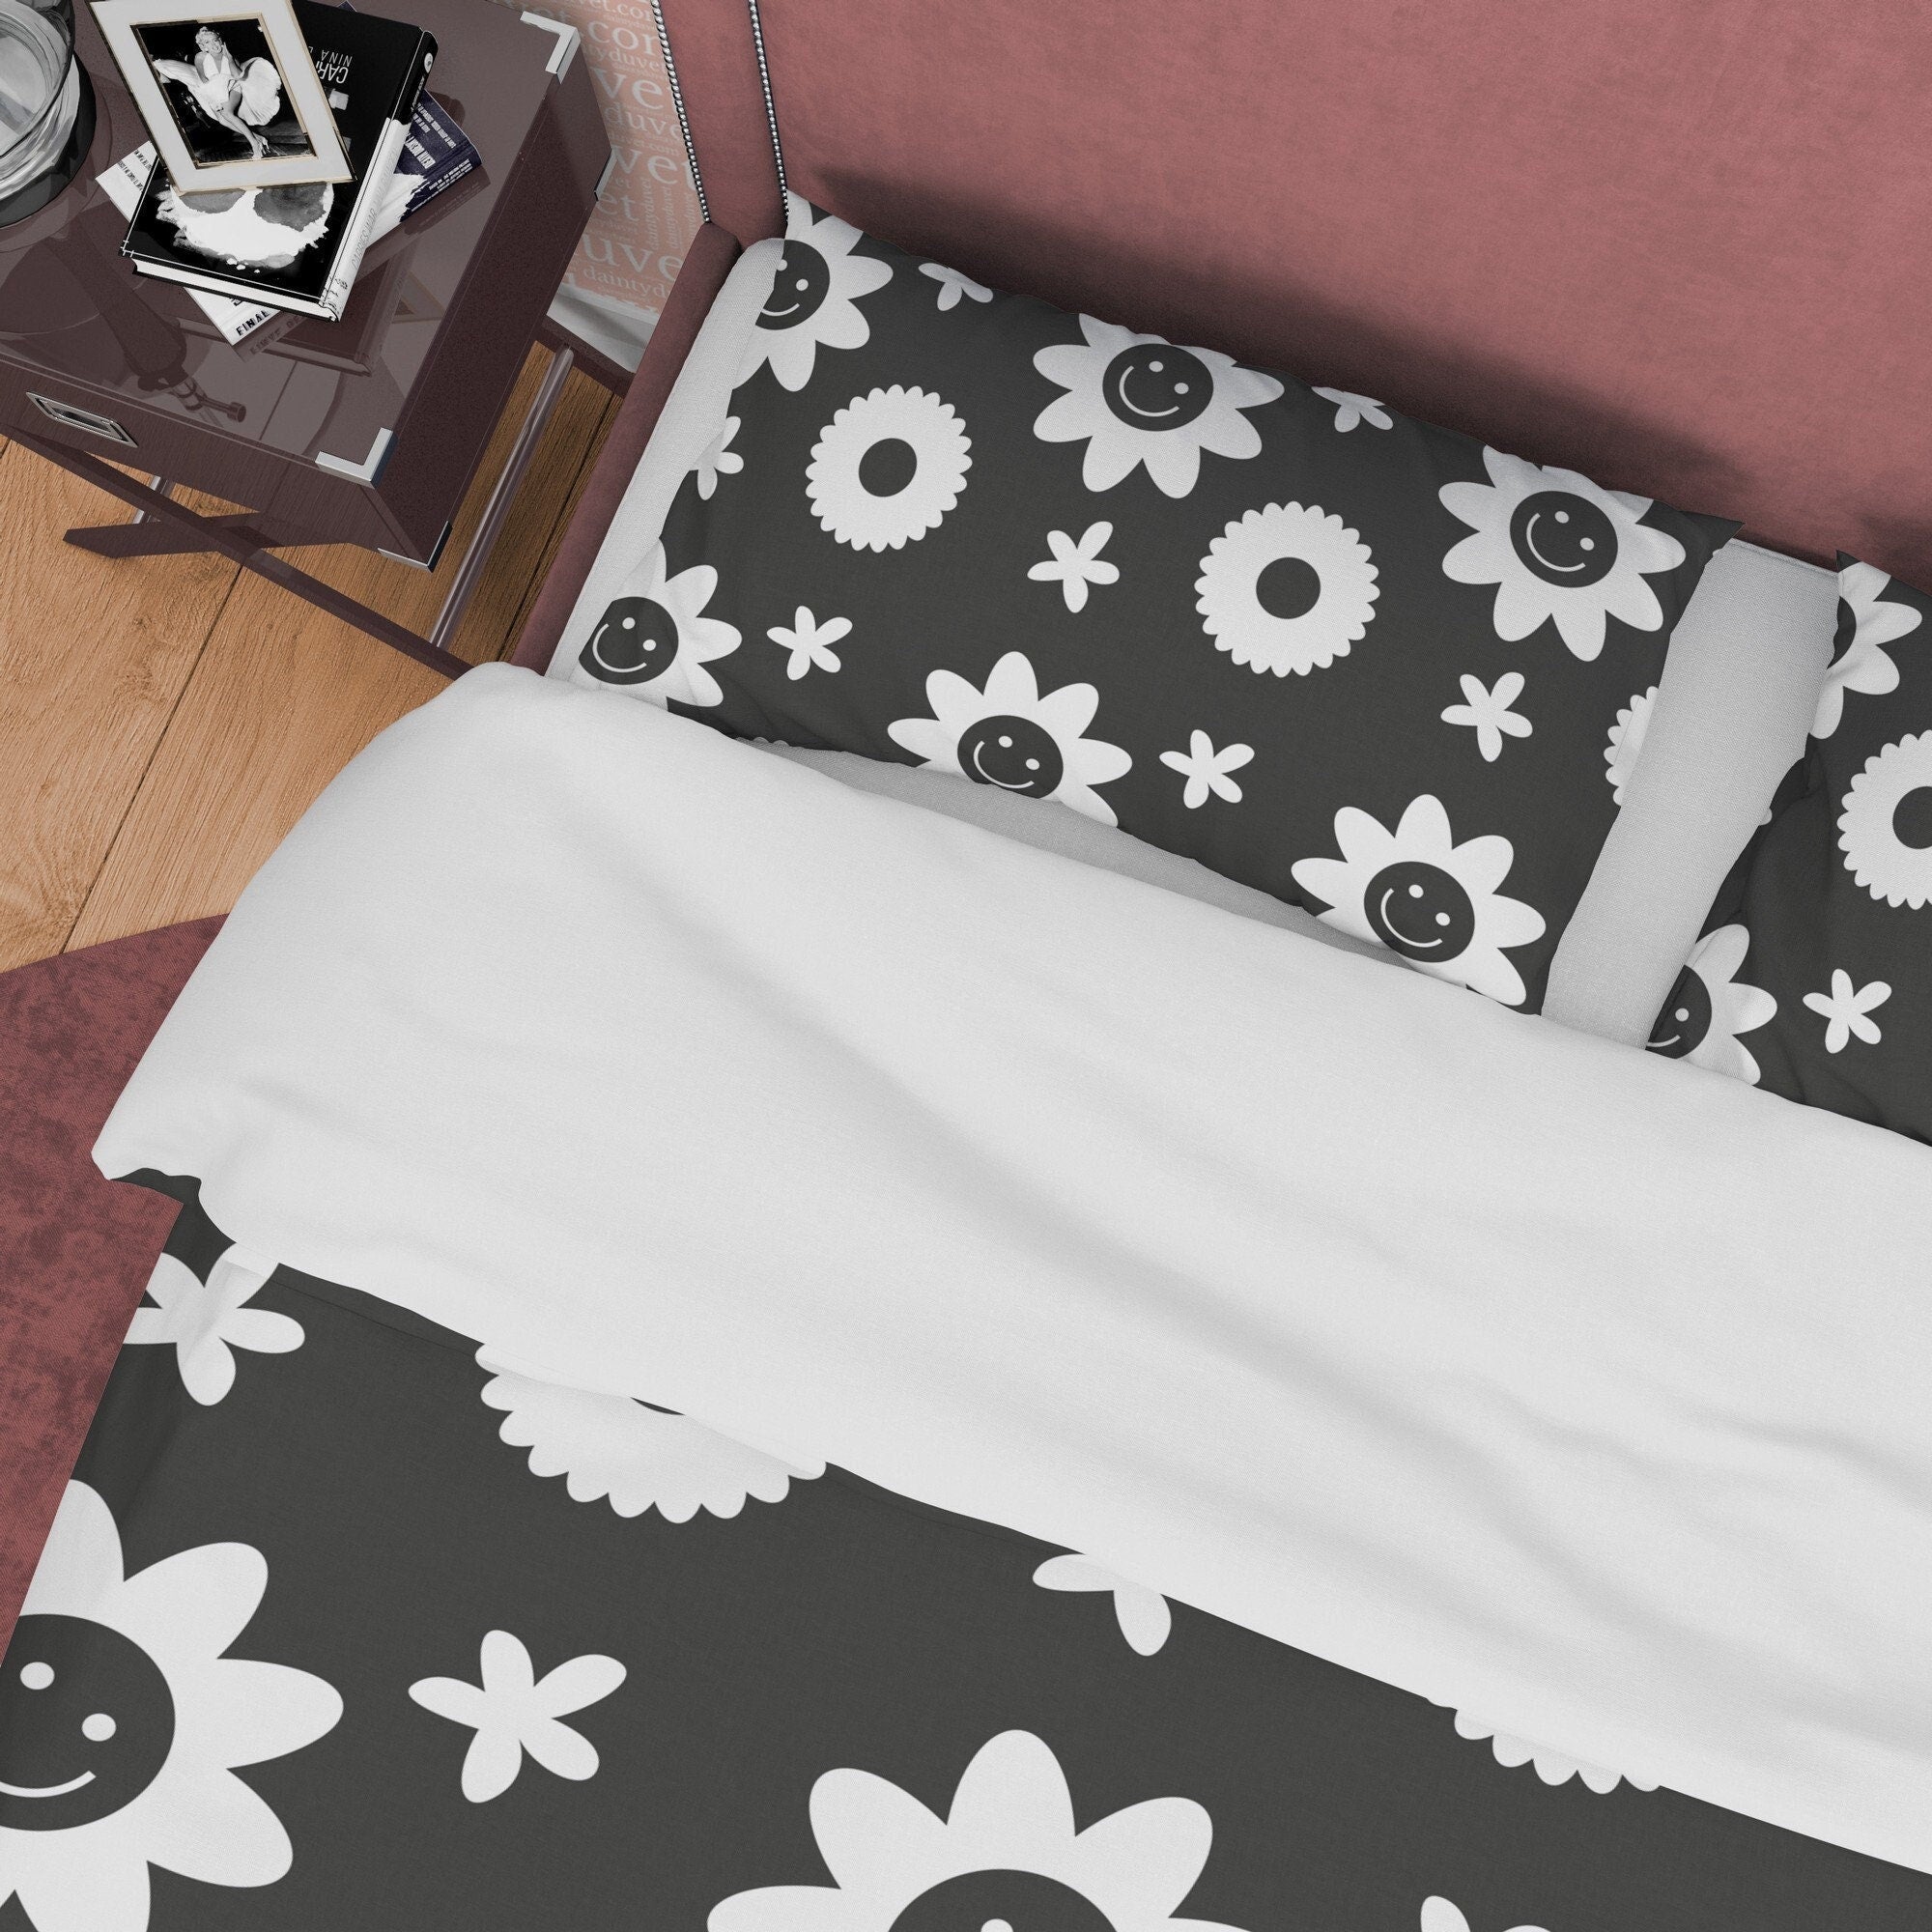 Geometric Simple Quilt Cover Black and White Duvet Cover Set, Smiley Flower Blanket Cover Floral Unique Bedspread, Retro Printed Bedding Set